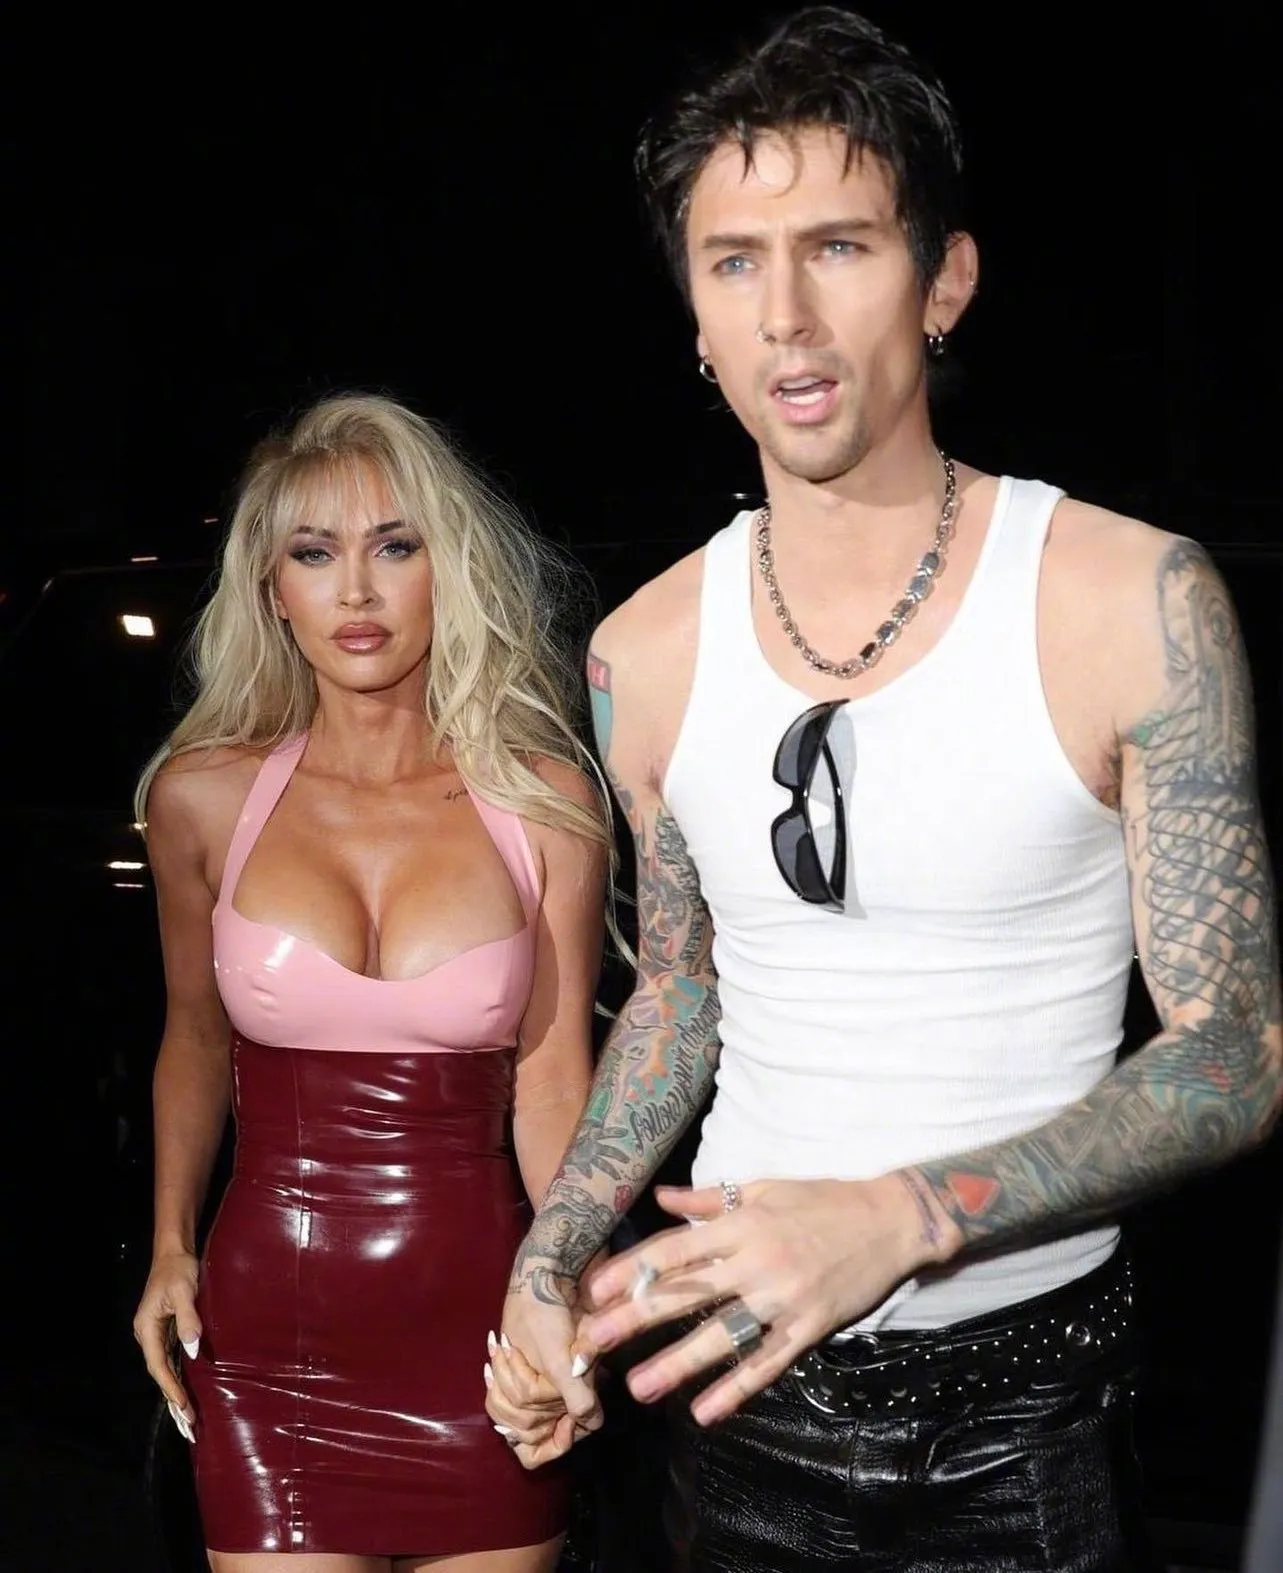 Megan Fox and Machine Gun Kelly dressed as Pamela Anderson and Tommy Lee for Halloween | FMV6